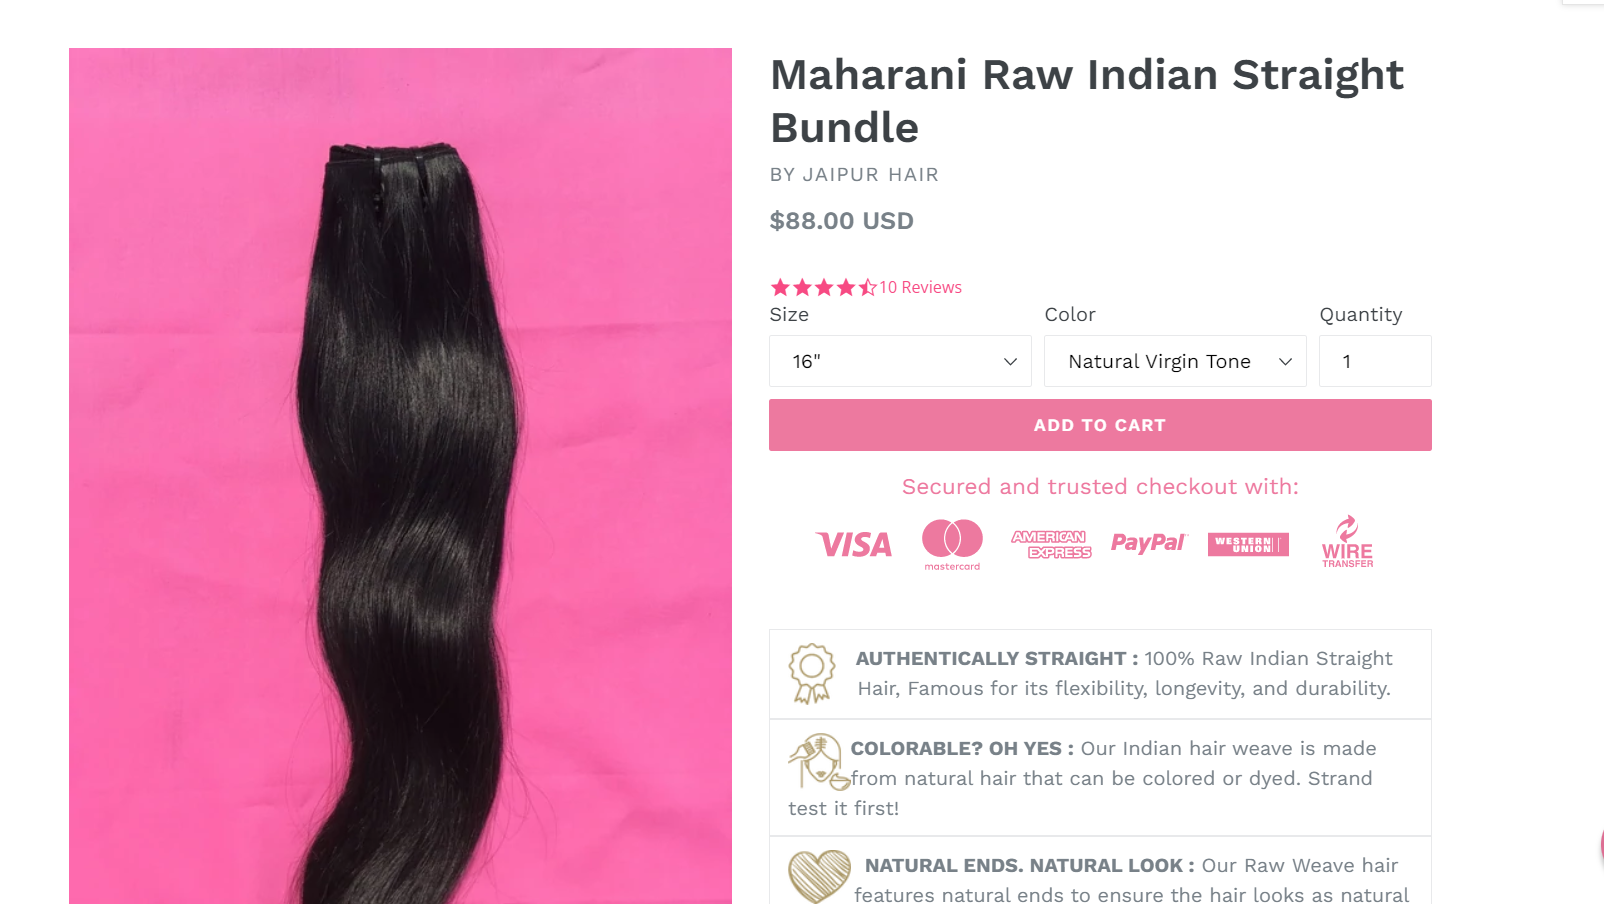 Indian temple hair wholesale : the dark side behind the black gold